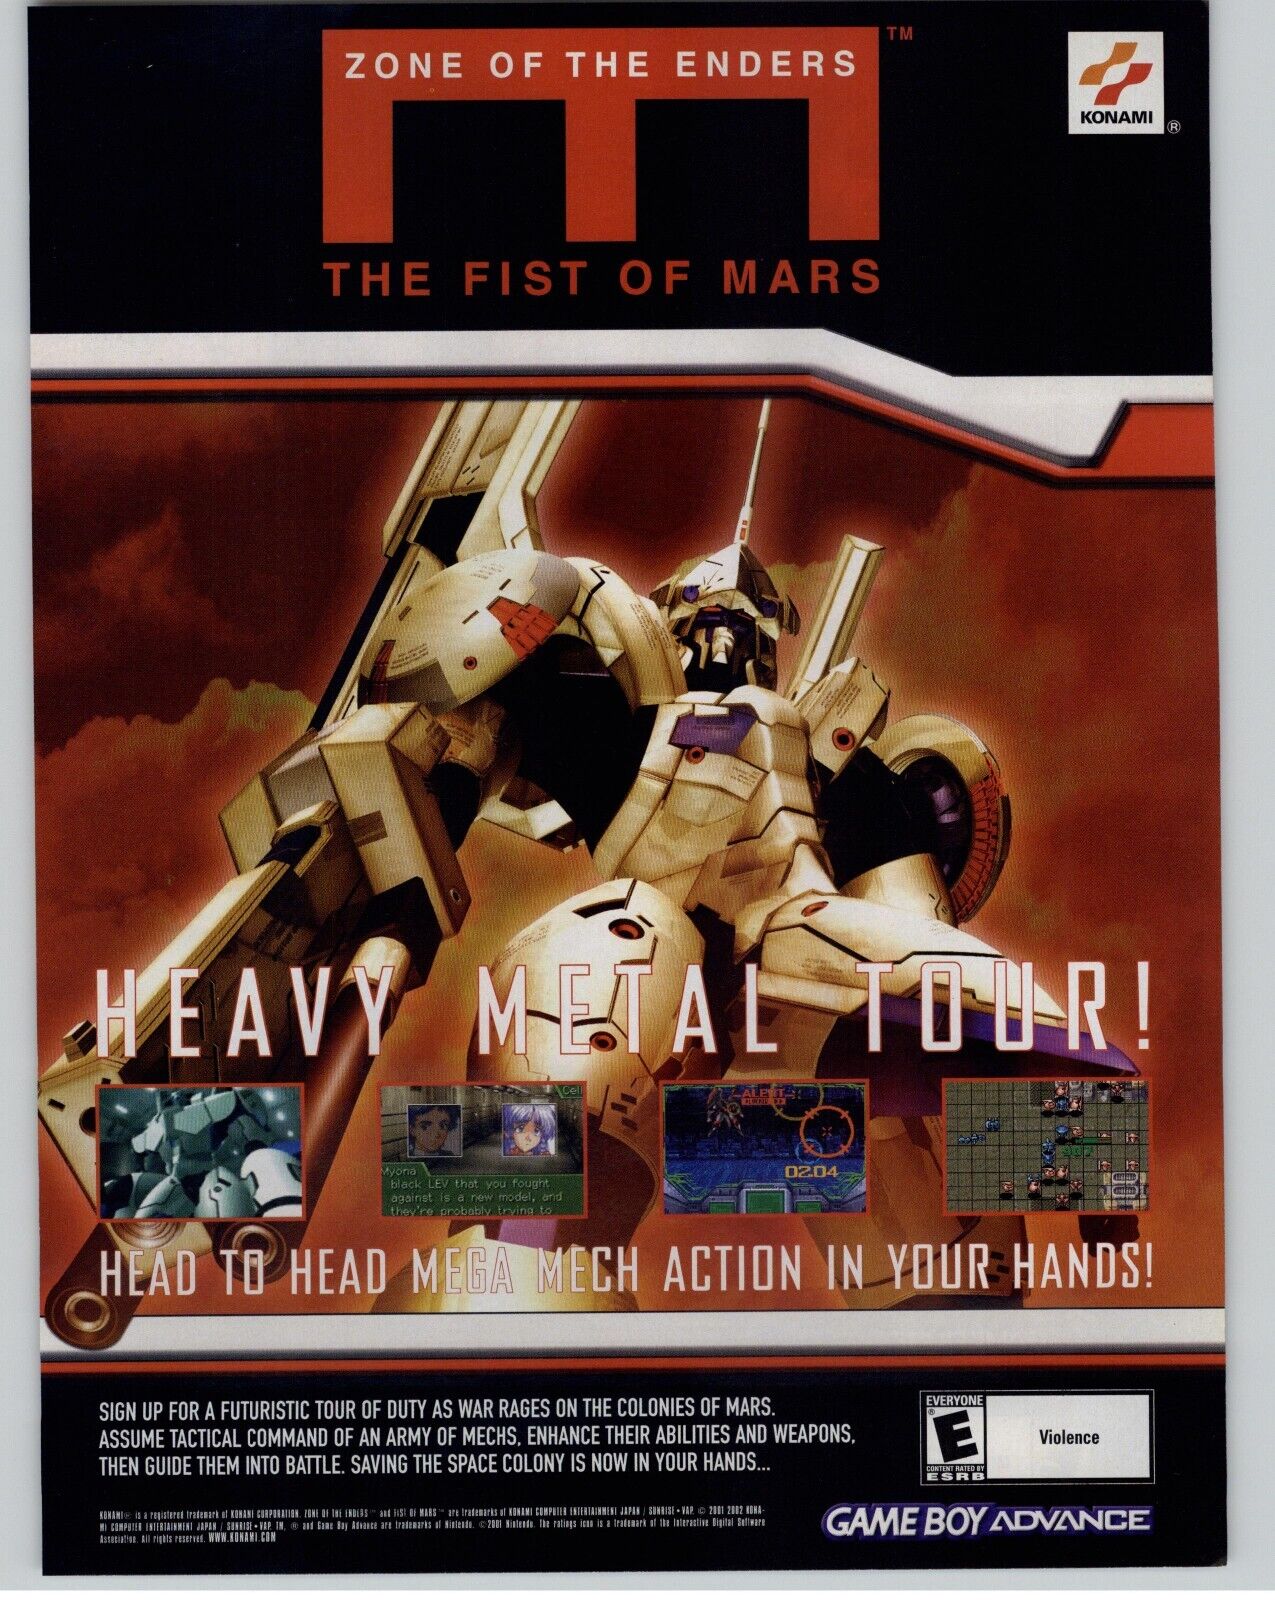 Zone of the Enders The Fist of Mars GBA 2002 Print Ad/Poster Anime Mech Game Art